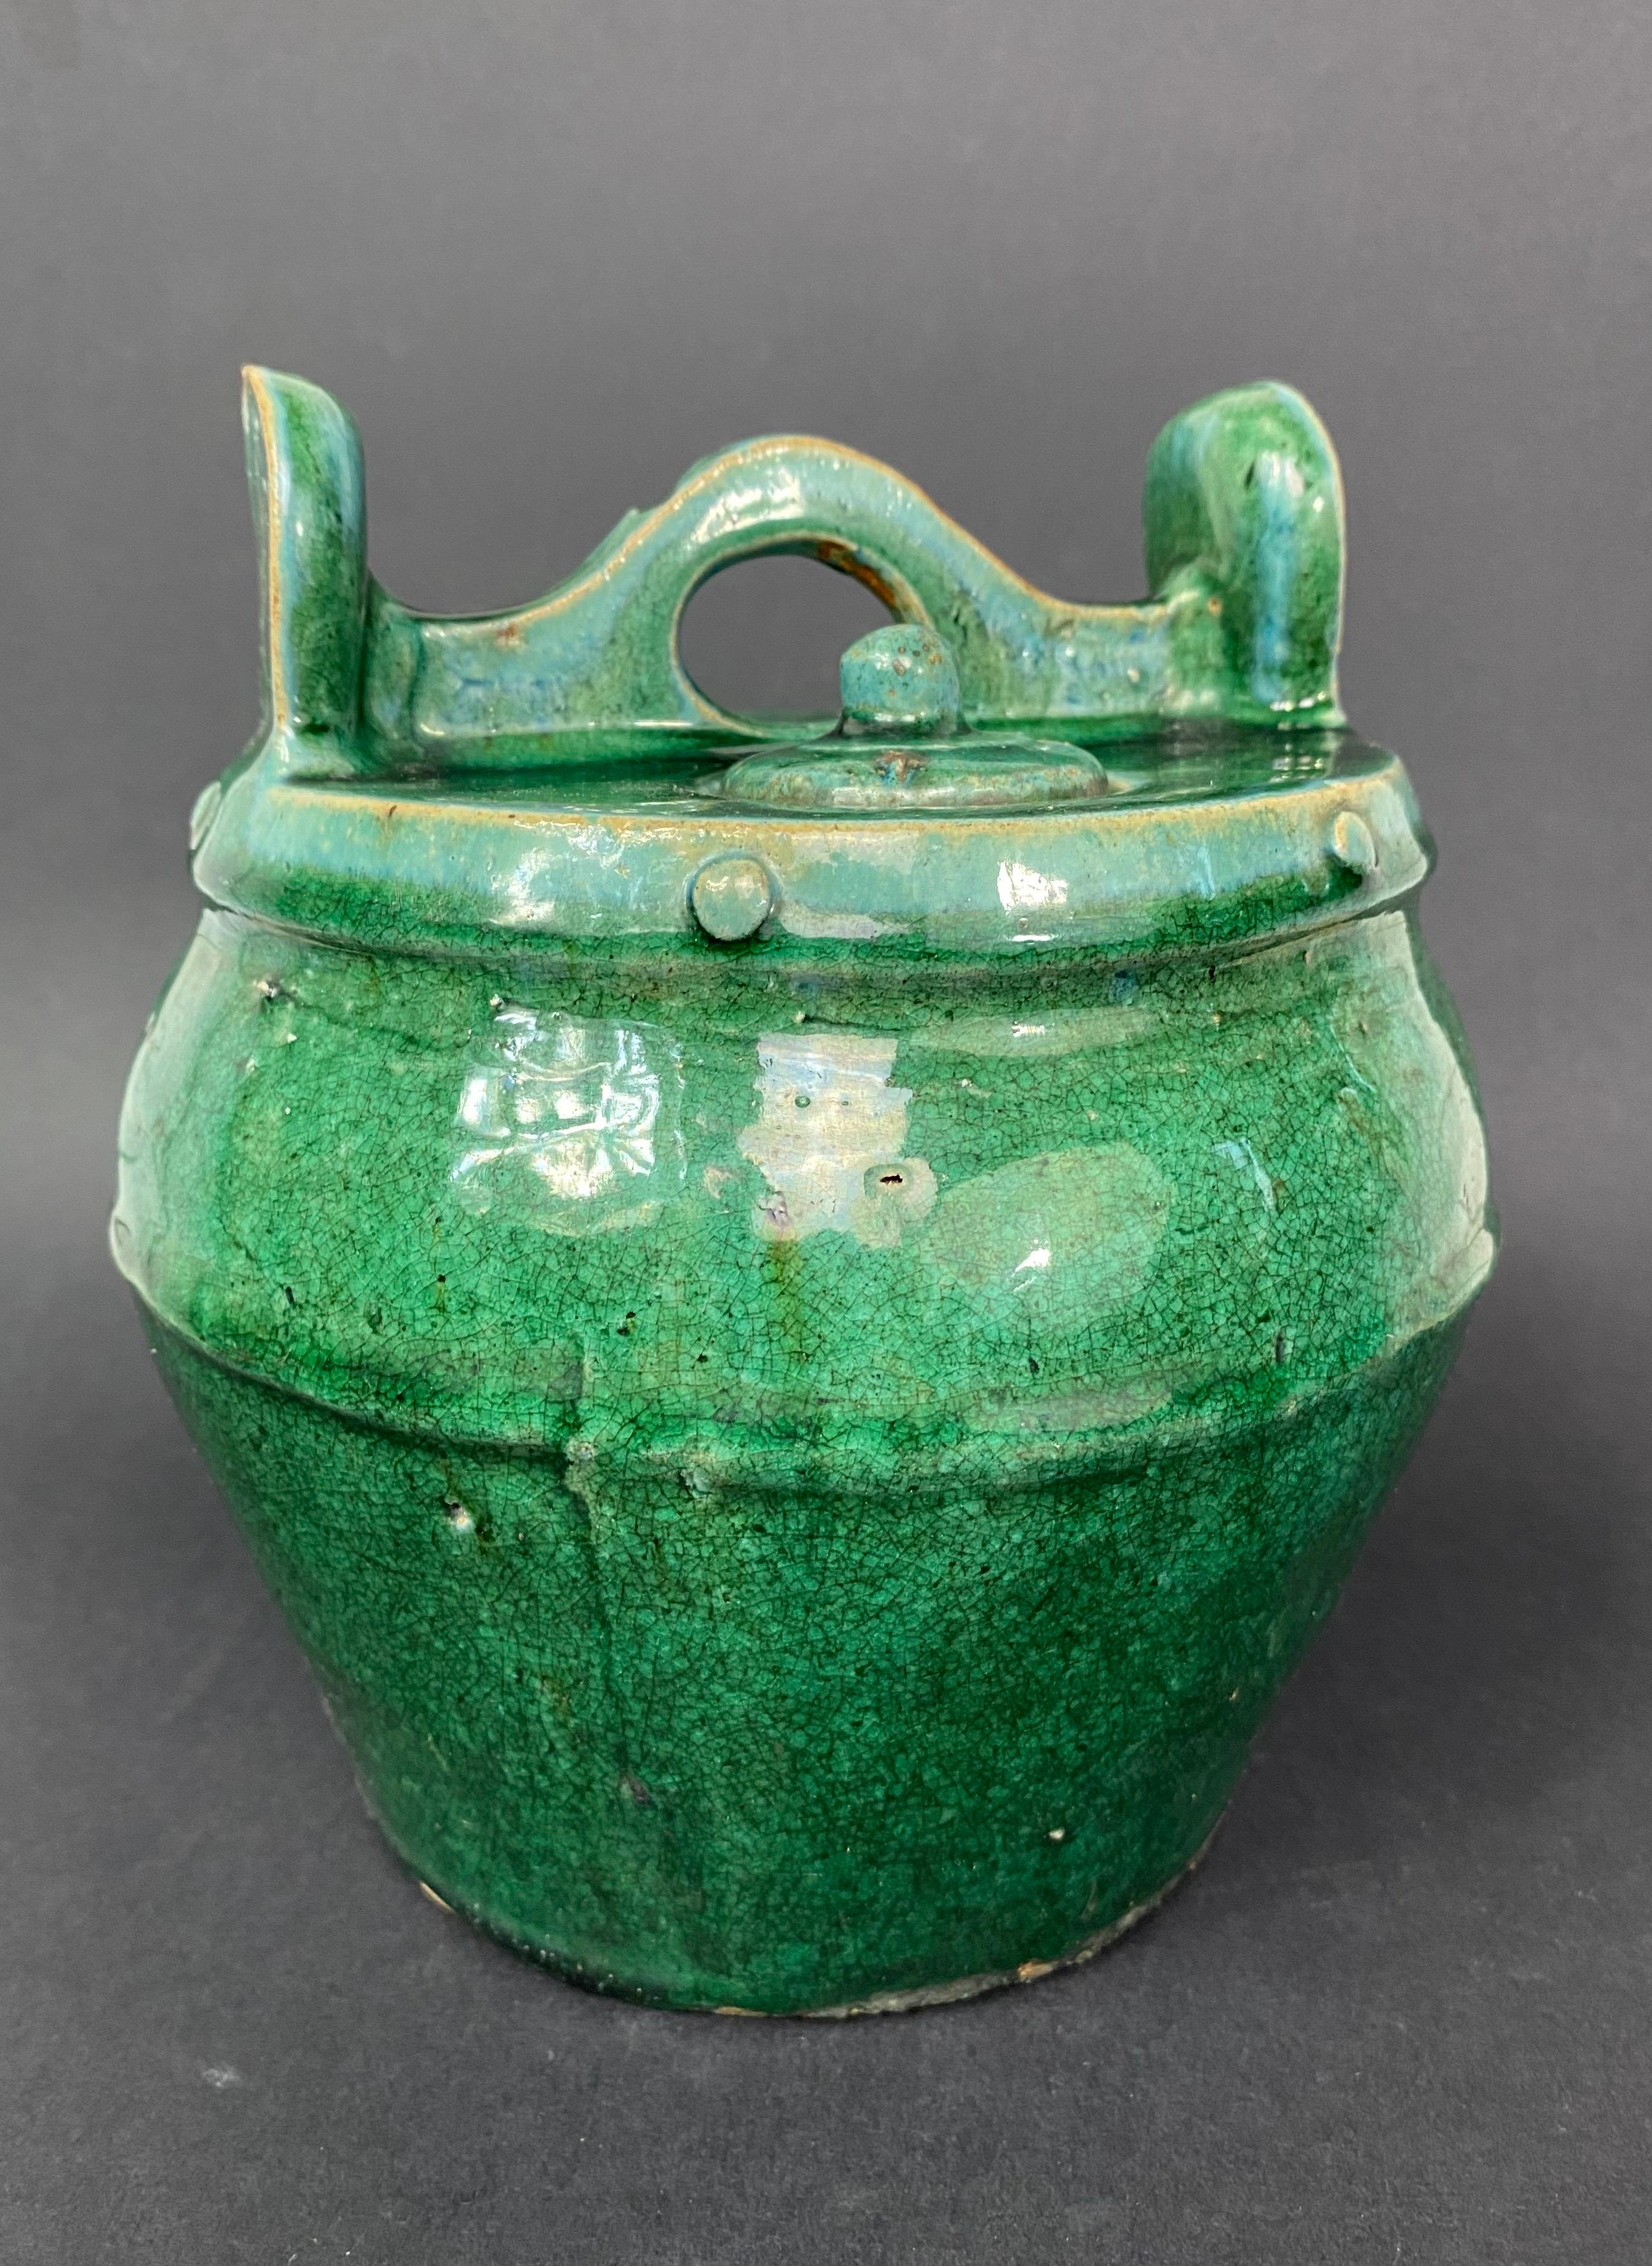 China Green Ceramic Alcohol Gourd 19th Century For Sale 5